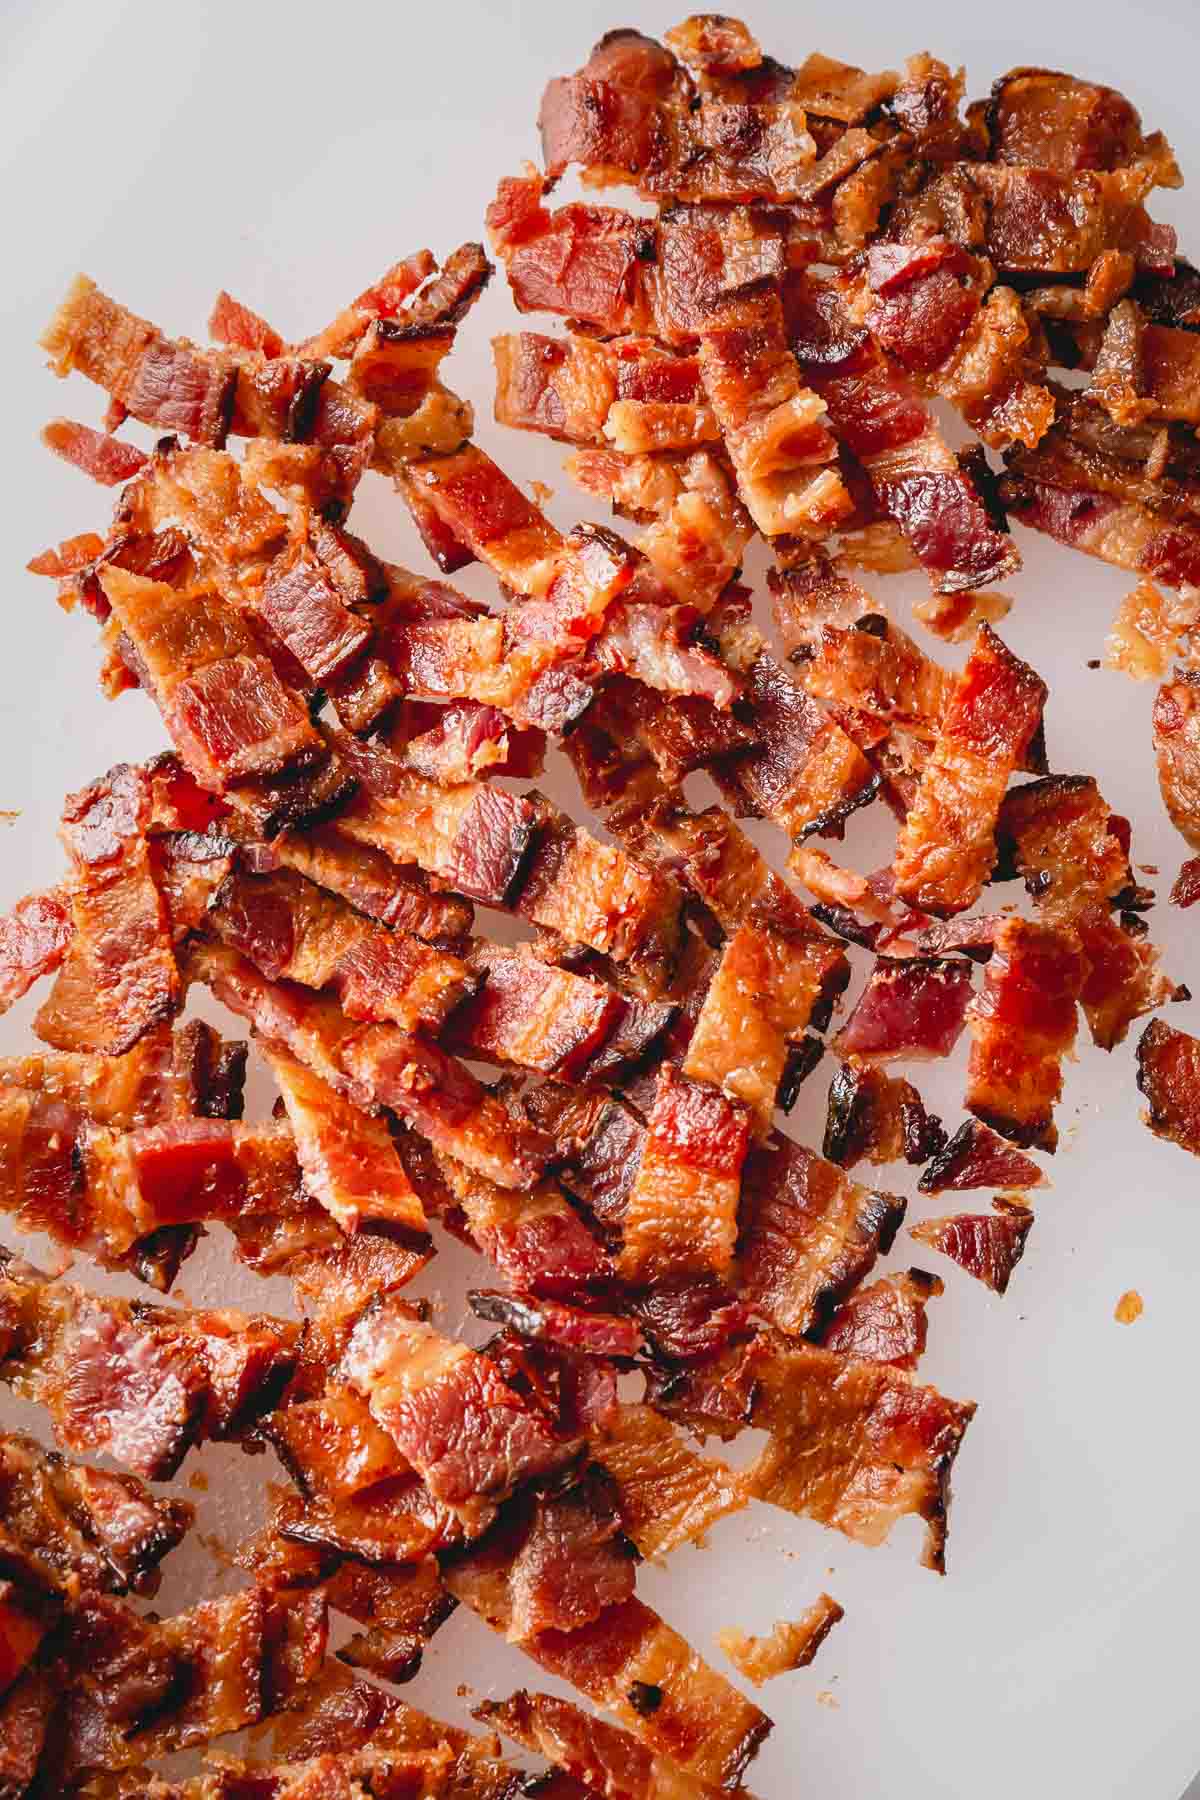 Cooked bacon chopped into pieces.